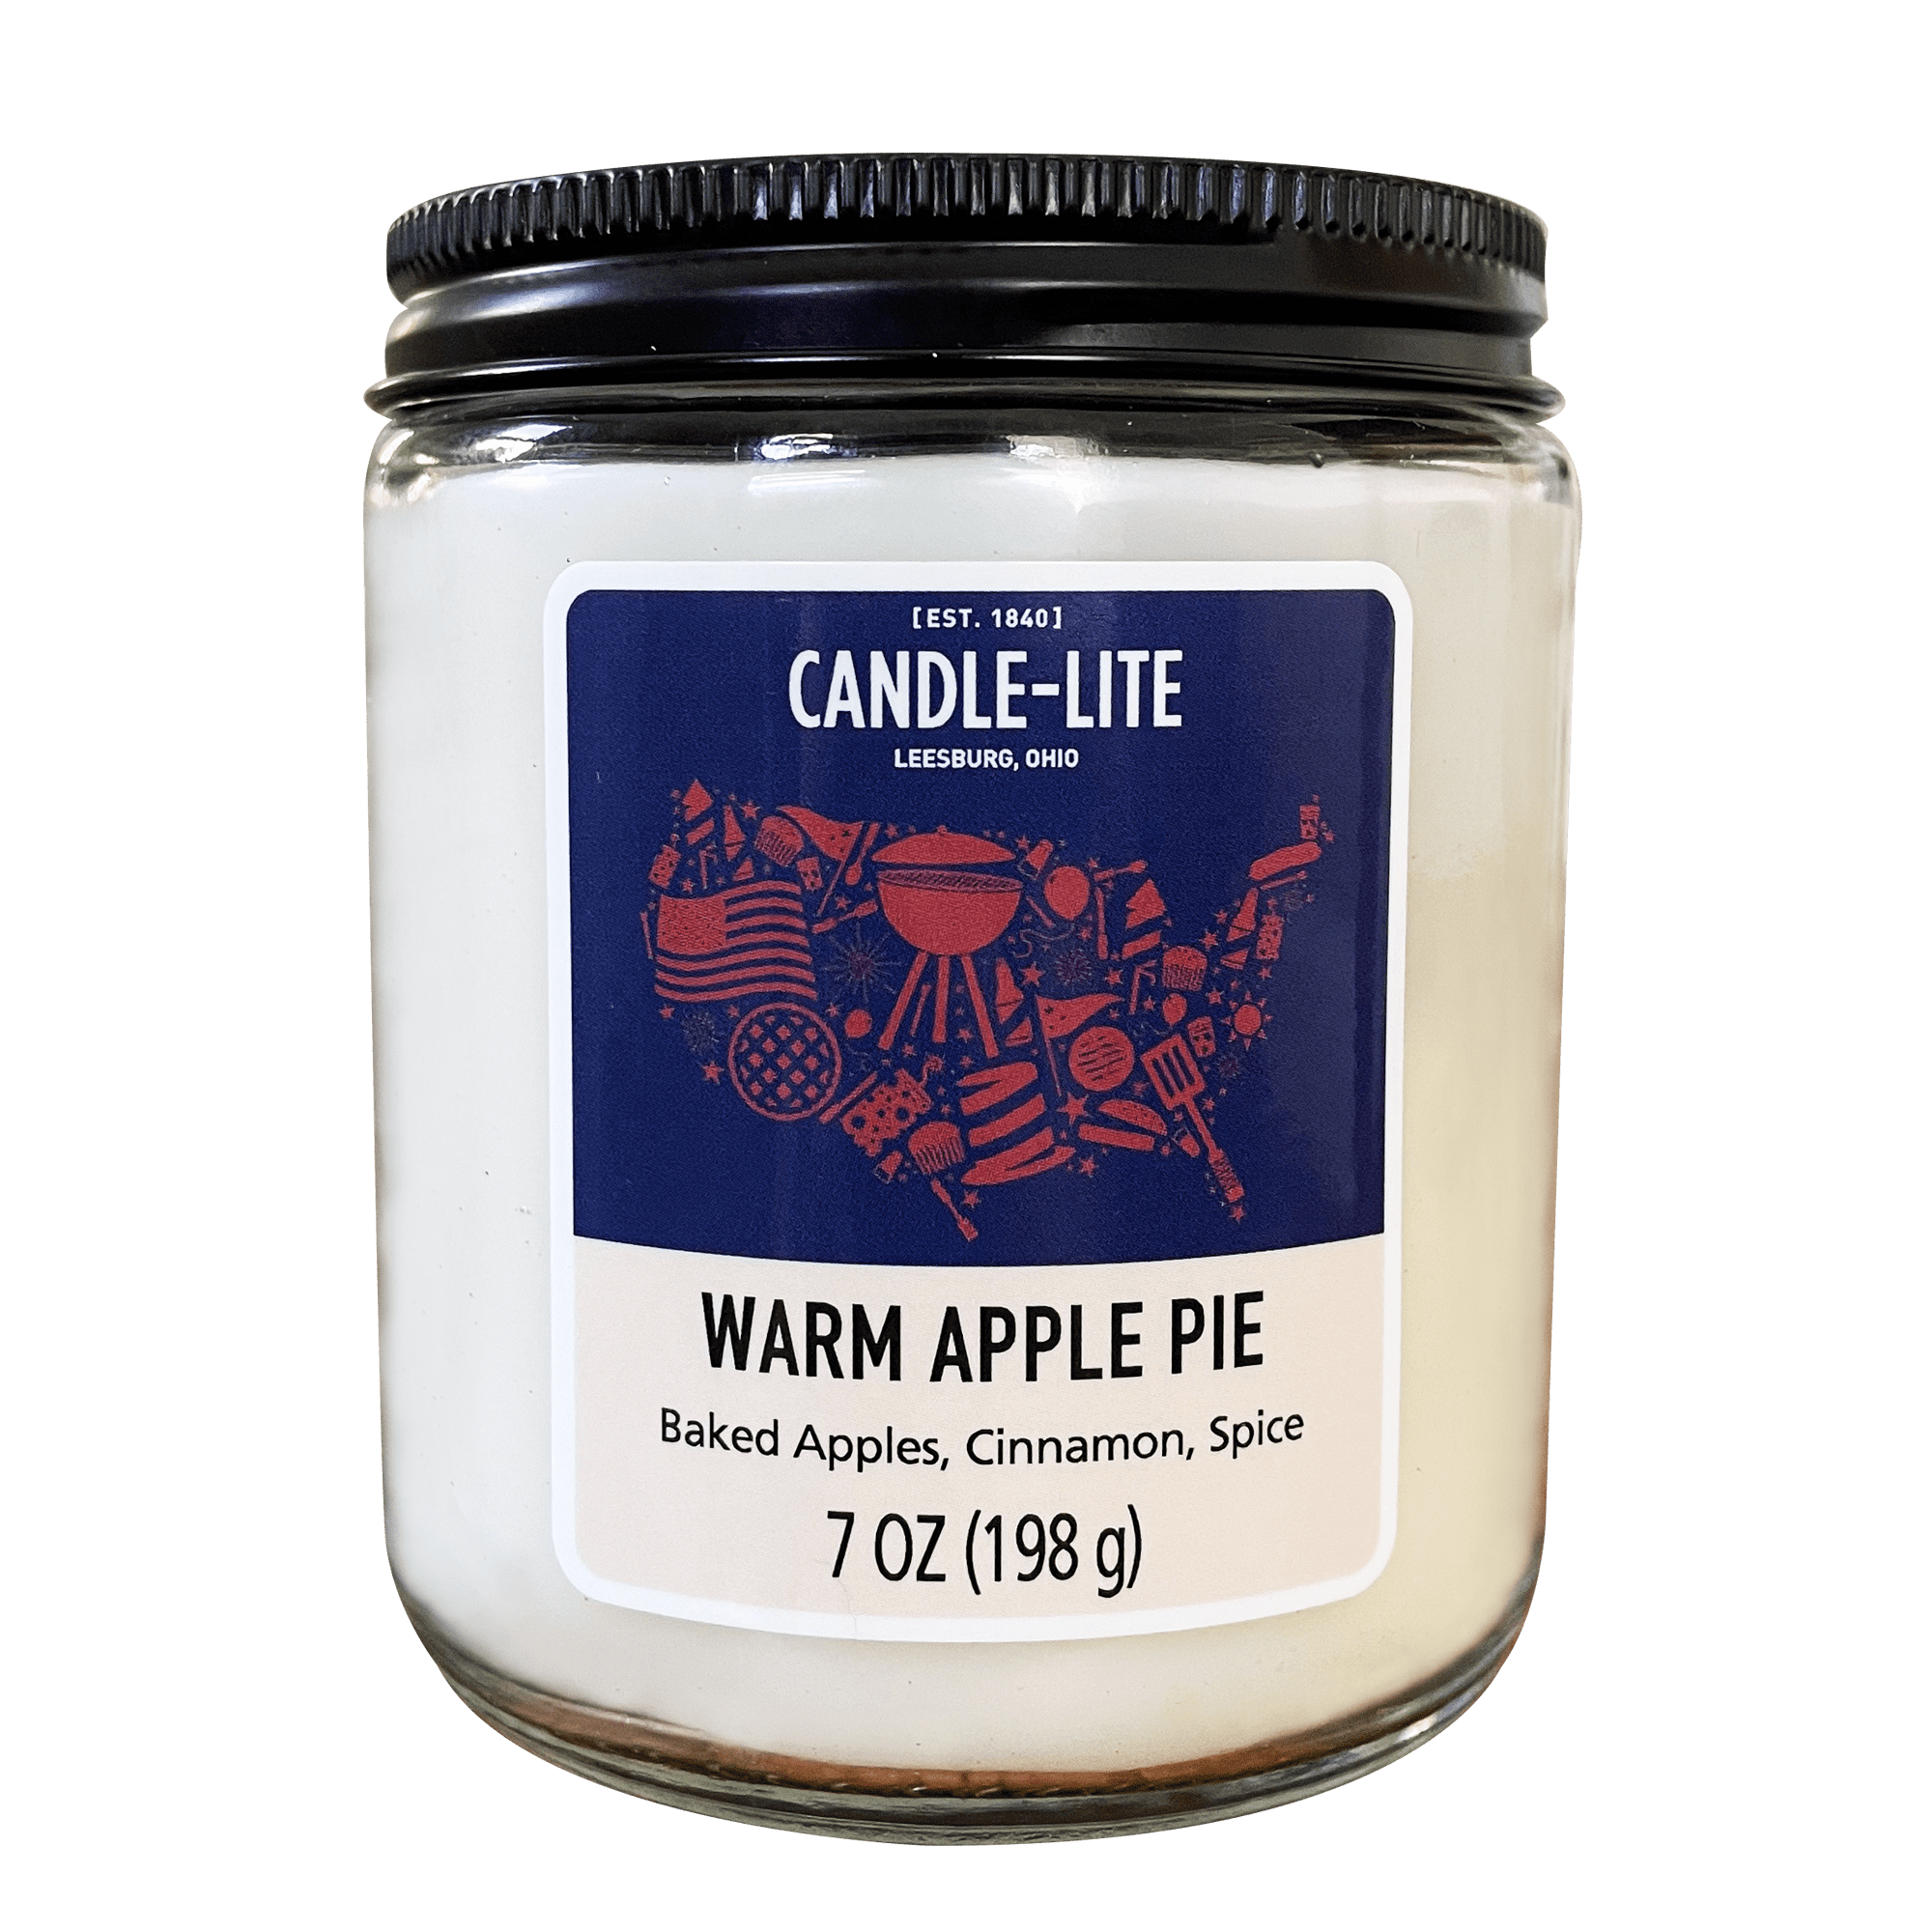 Candle-lite Pride 7 oz. Candle Gift Set, 4-Pack Cozy Comfort & Warm Apple Pie